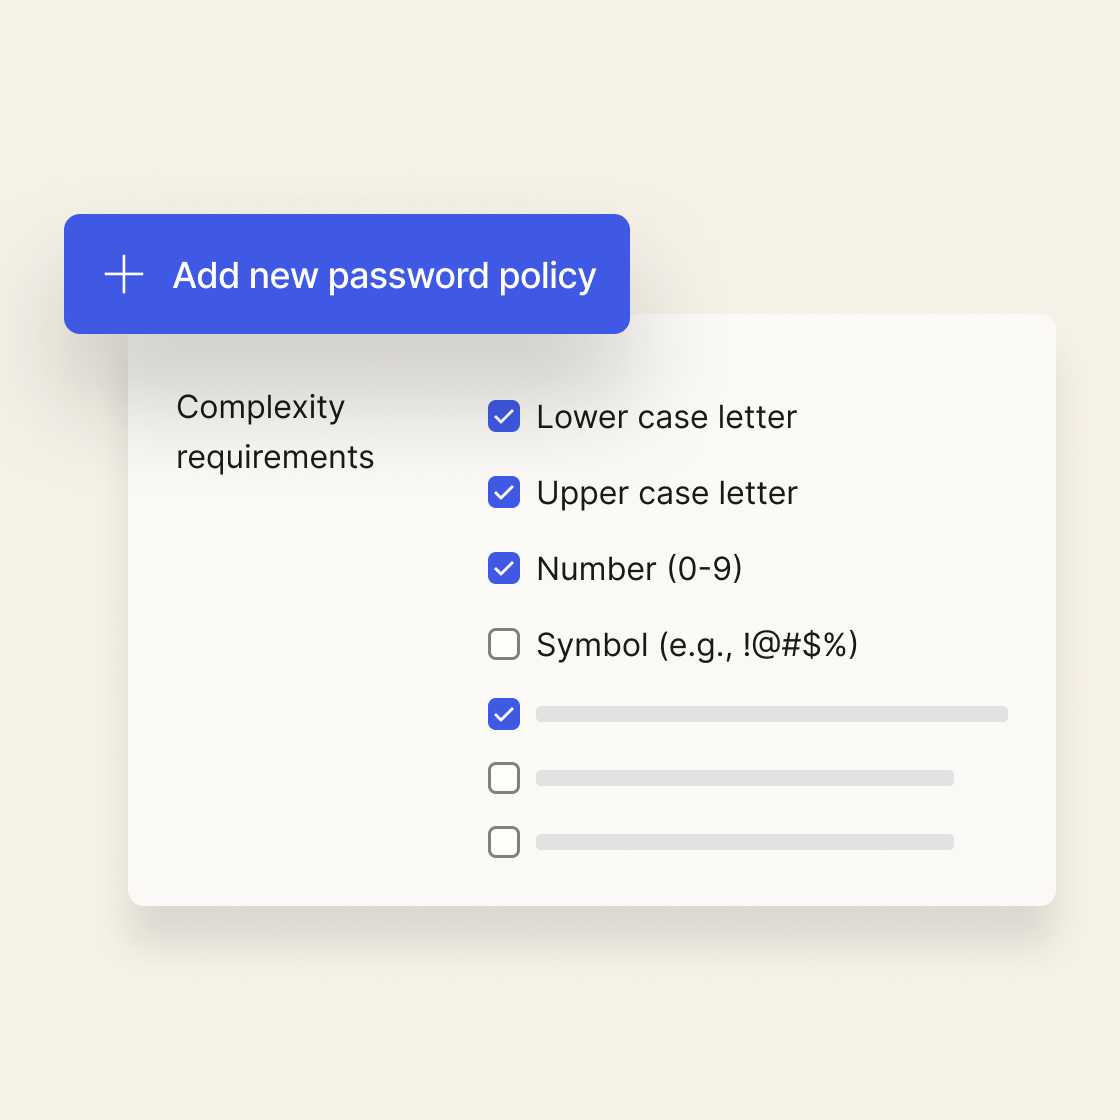 Image of a screen displaying new password requirements.